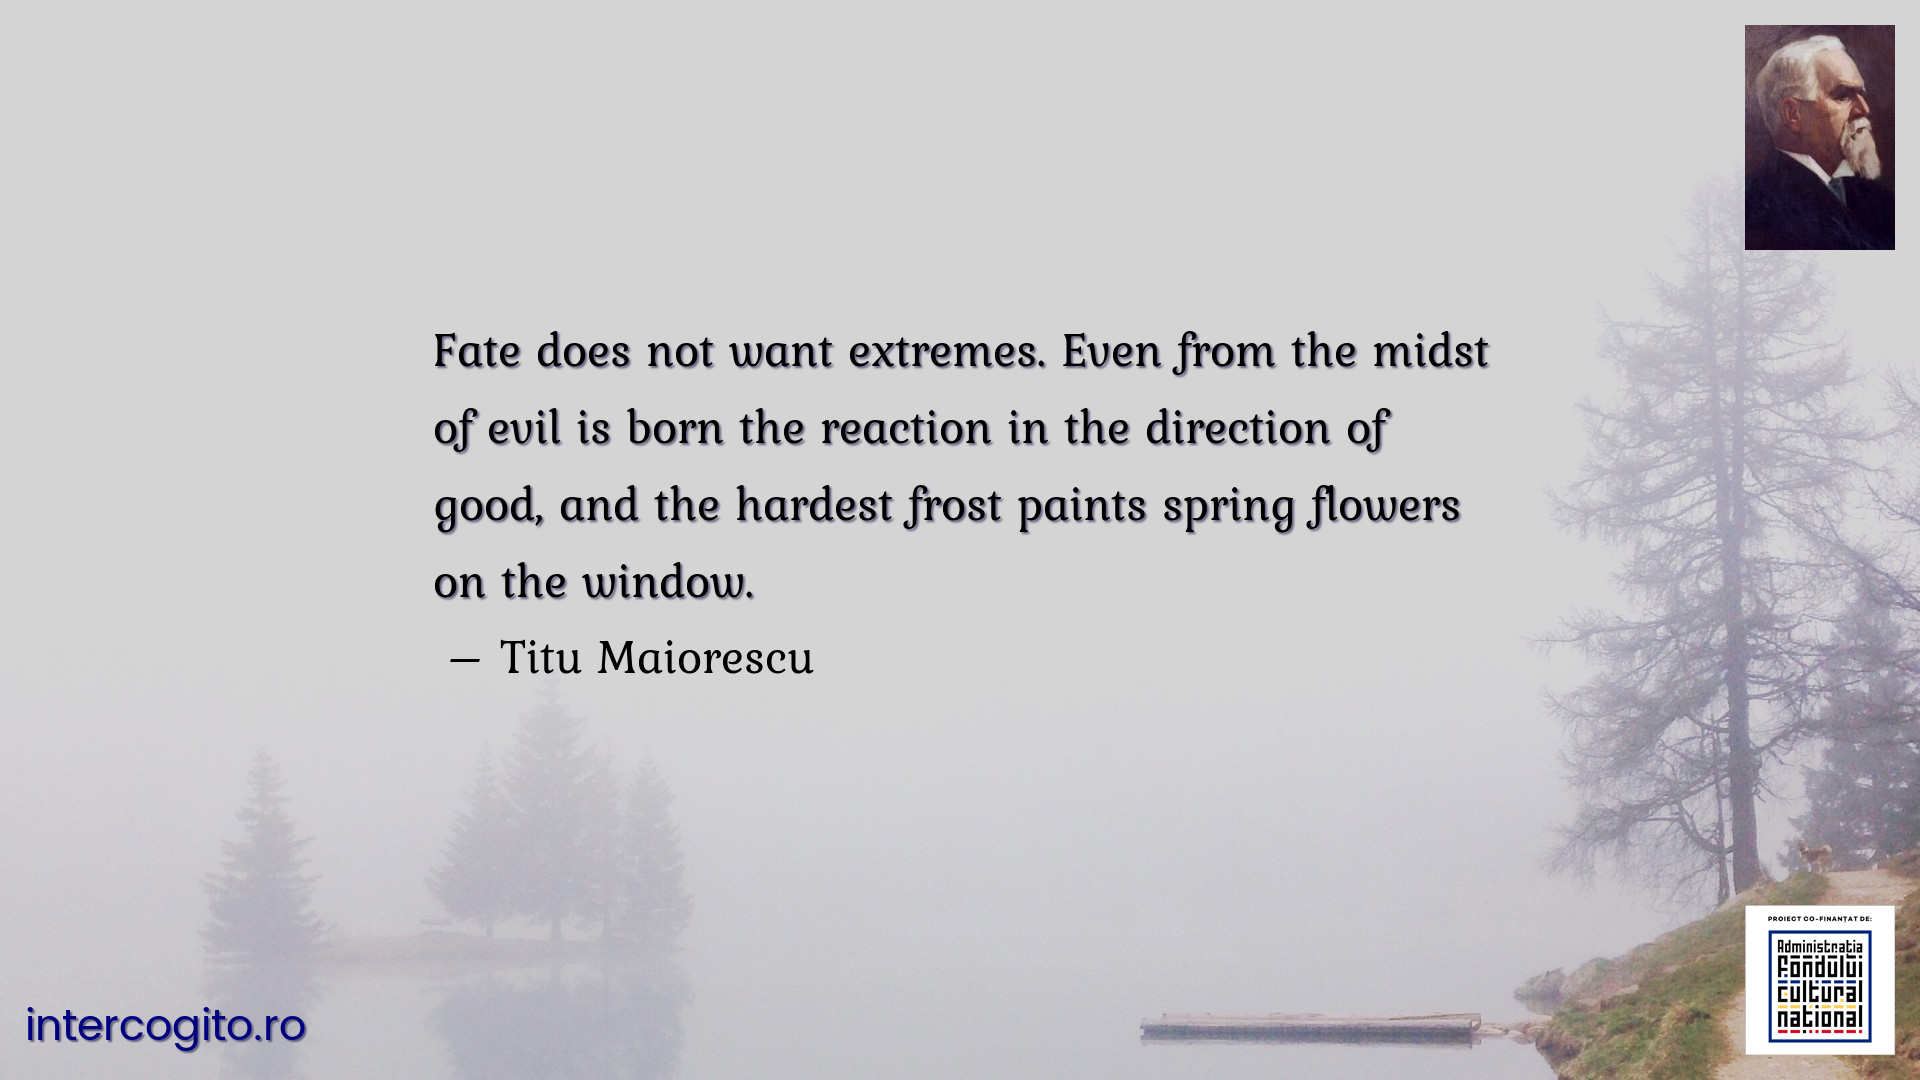 Fate does not want extremes. Even from the midst of evil is born the reaction in the direction of good, and the hardest frost paints spring flowers on the window.